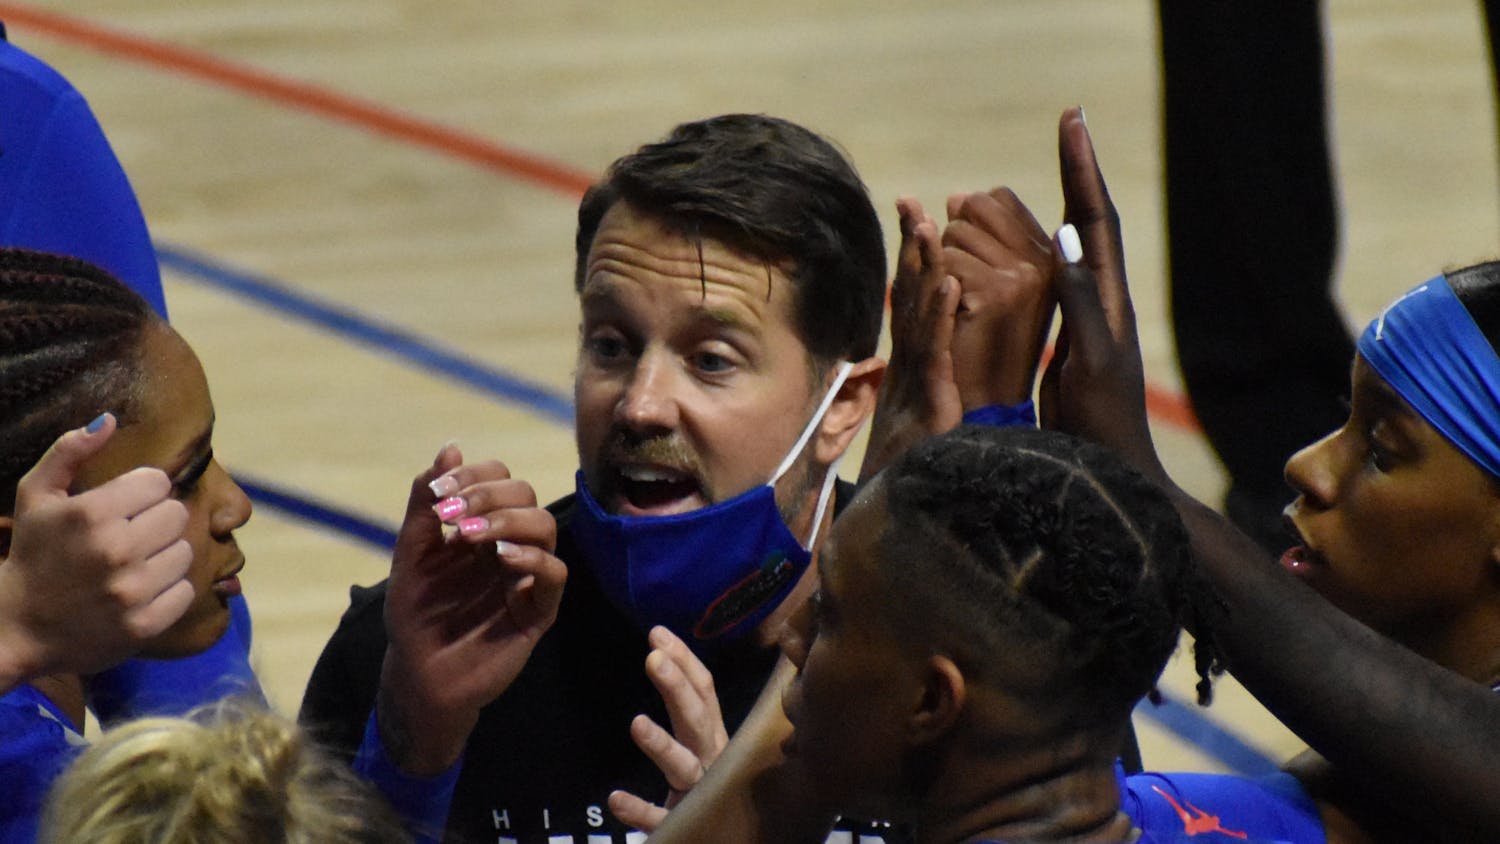 Former Florida coach Cam Newbauer in the huddle with his team in a game against Alabama on Feb. 18, 2021.